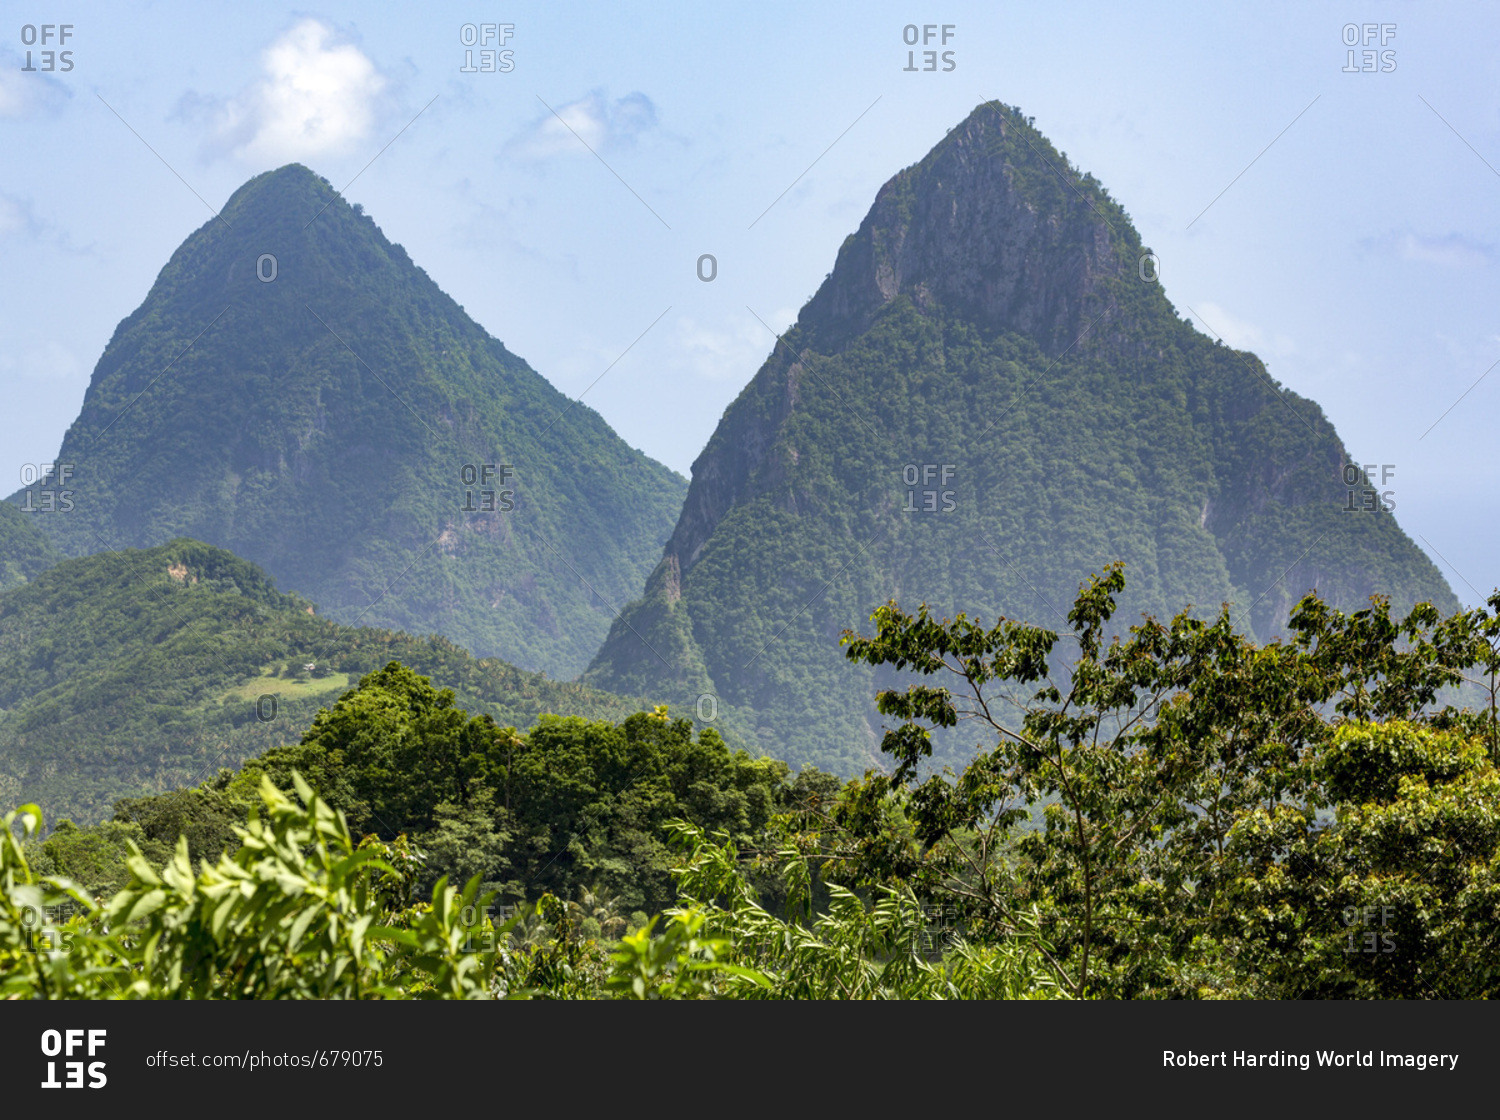 The Two Pitons, UNESCO World Heritage Site, near Soufriere, St. Lucia, Windward Islands, West Indies Caribbean, Central America